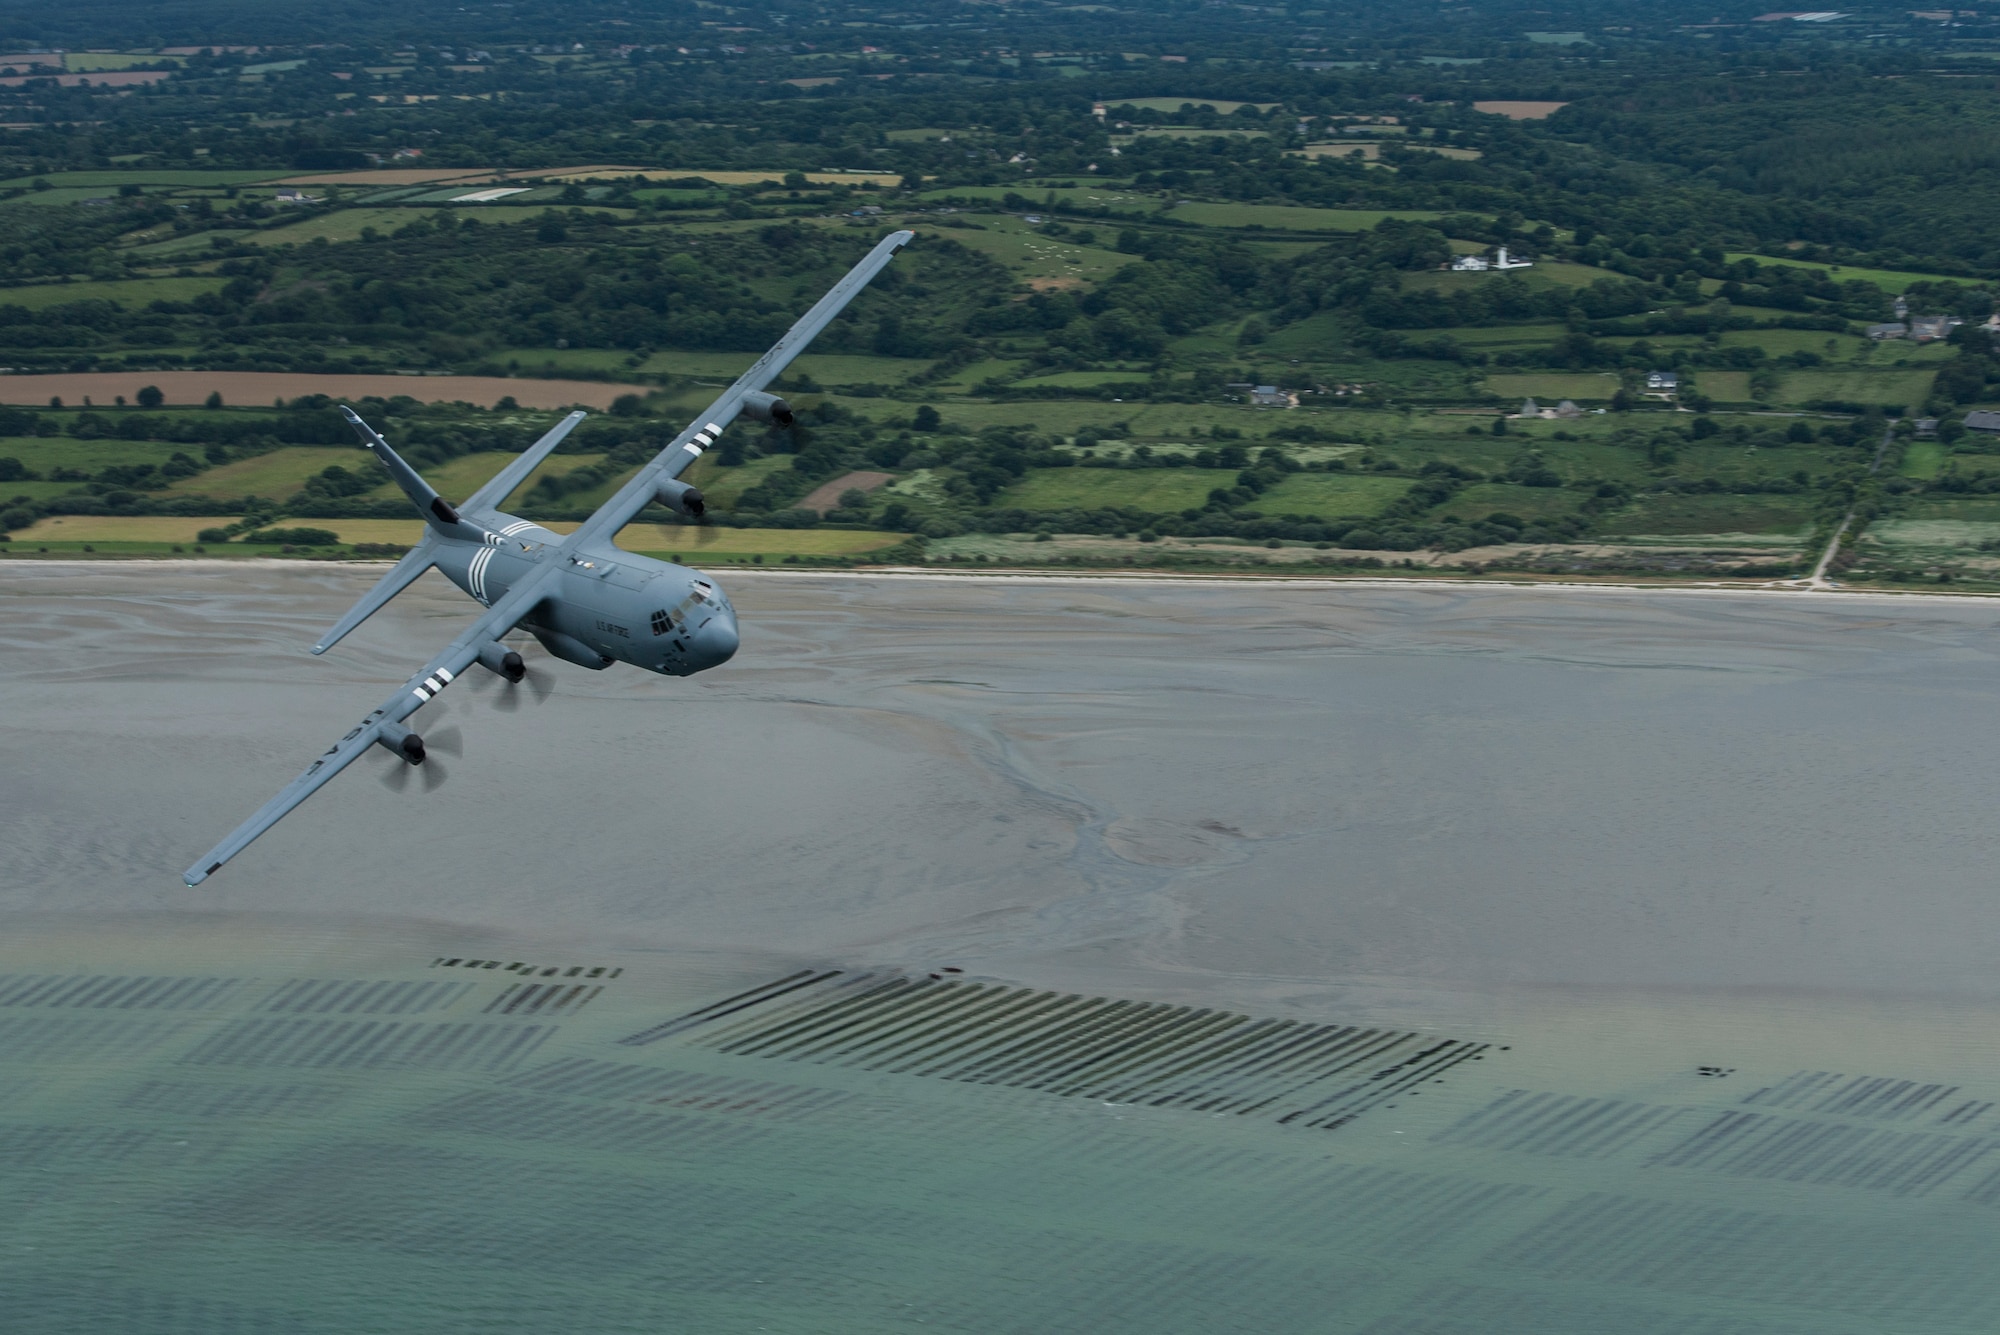 A U.S. Air Force C-130J Super Hercules, assigned to the 37th Airlift Squadron, Ramstein Air Base, Germany, wears the marks of “Whiskey 7,” as it flies over Utah Beach, Normandy, France, June 6, 2019. The 37th AS’ lineage draws from the 37th Troop Carrier Squadron, who wore the “Whiskey 7,” or W7 on their aircraft when they conducted paratrooper drops over Normandy, France during Operation Neptune, June 6, 1944. (U.S. Air Force photo by Senior Airman Devin M. Rumbaugh)